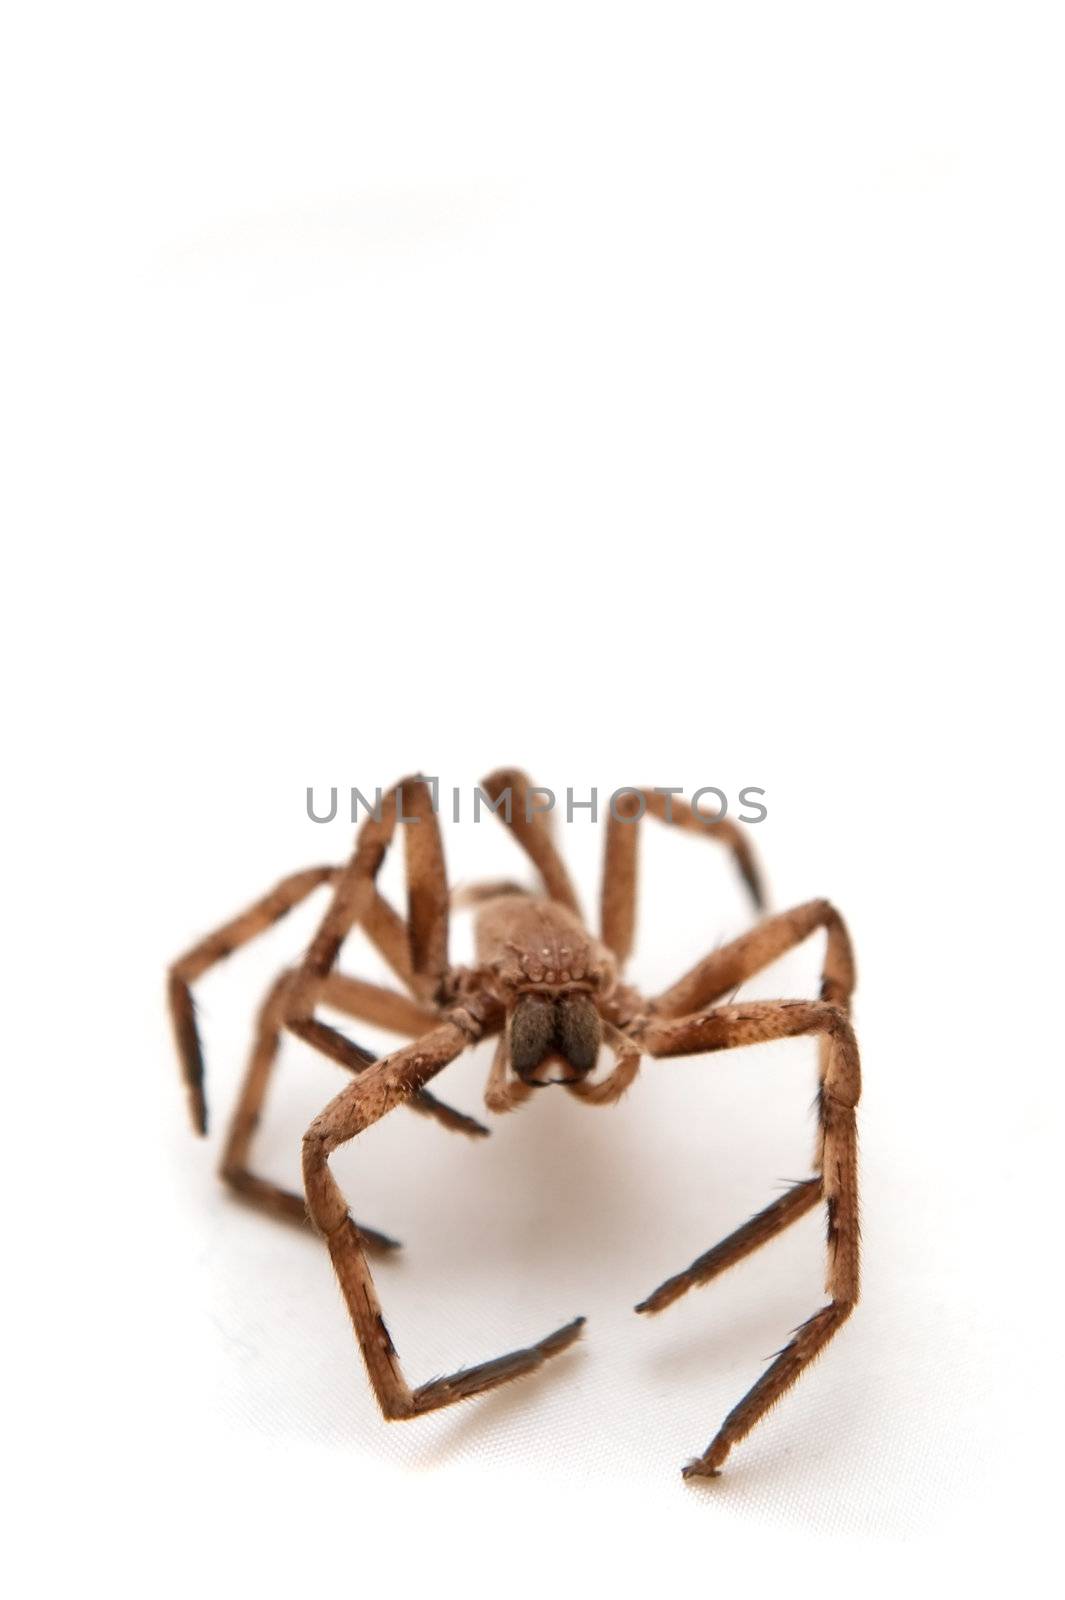 big brown spider with open legs sitting on white paper by Ansunette